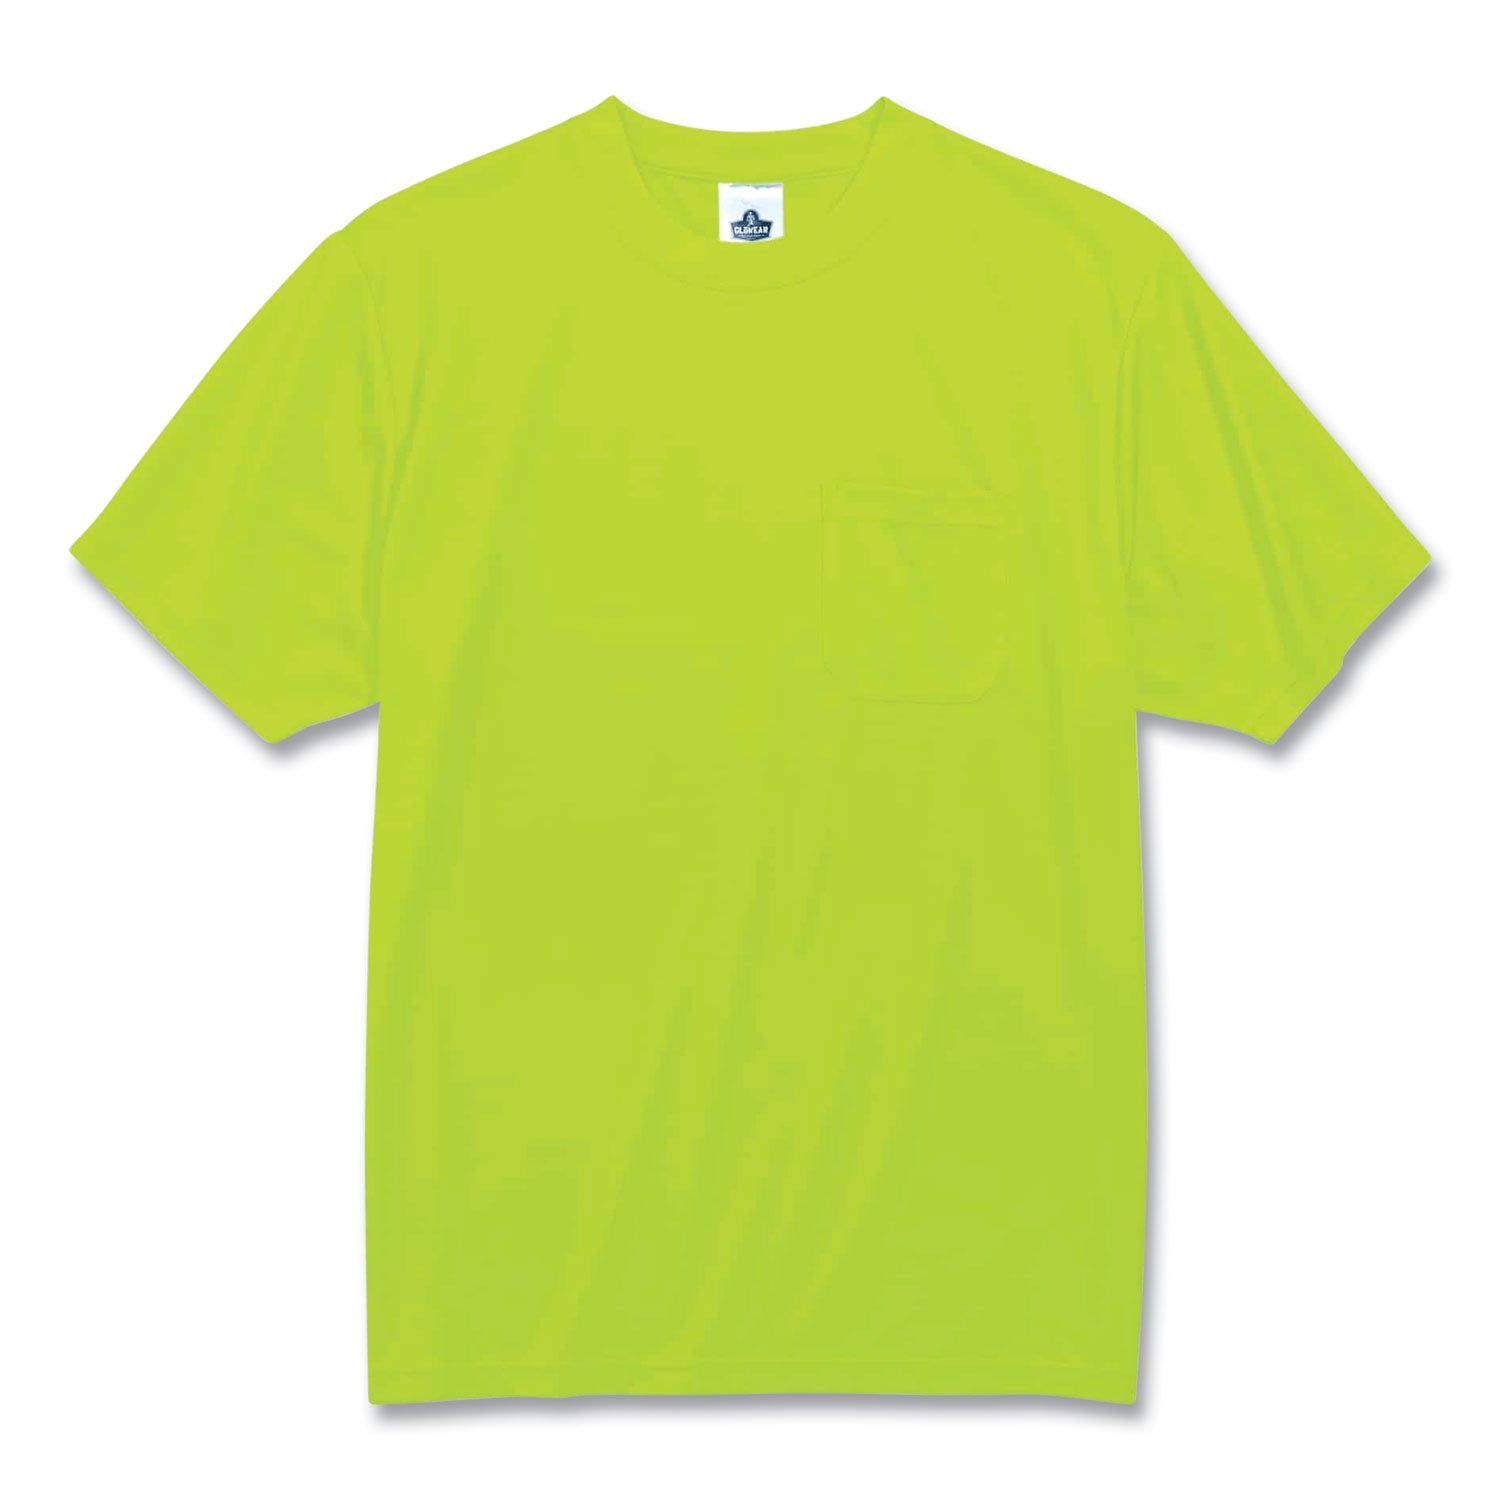 glowear-8089-non-certified-hi-vis-t-shirt-polyester-3x-large-lime-ships-in-1-3-business-days_ego21557 - 1